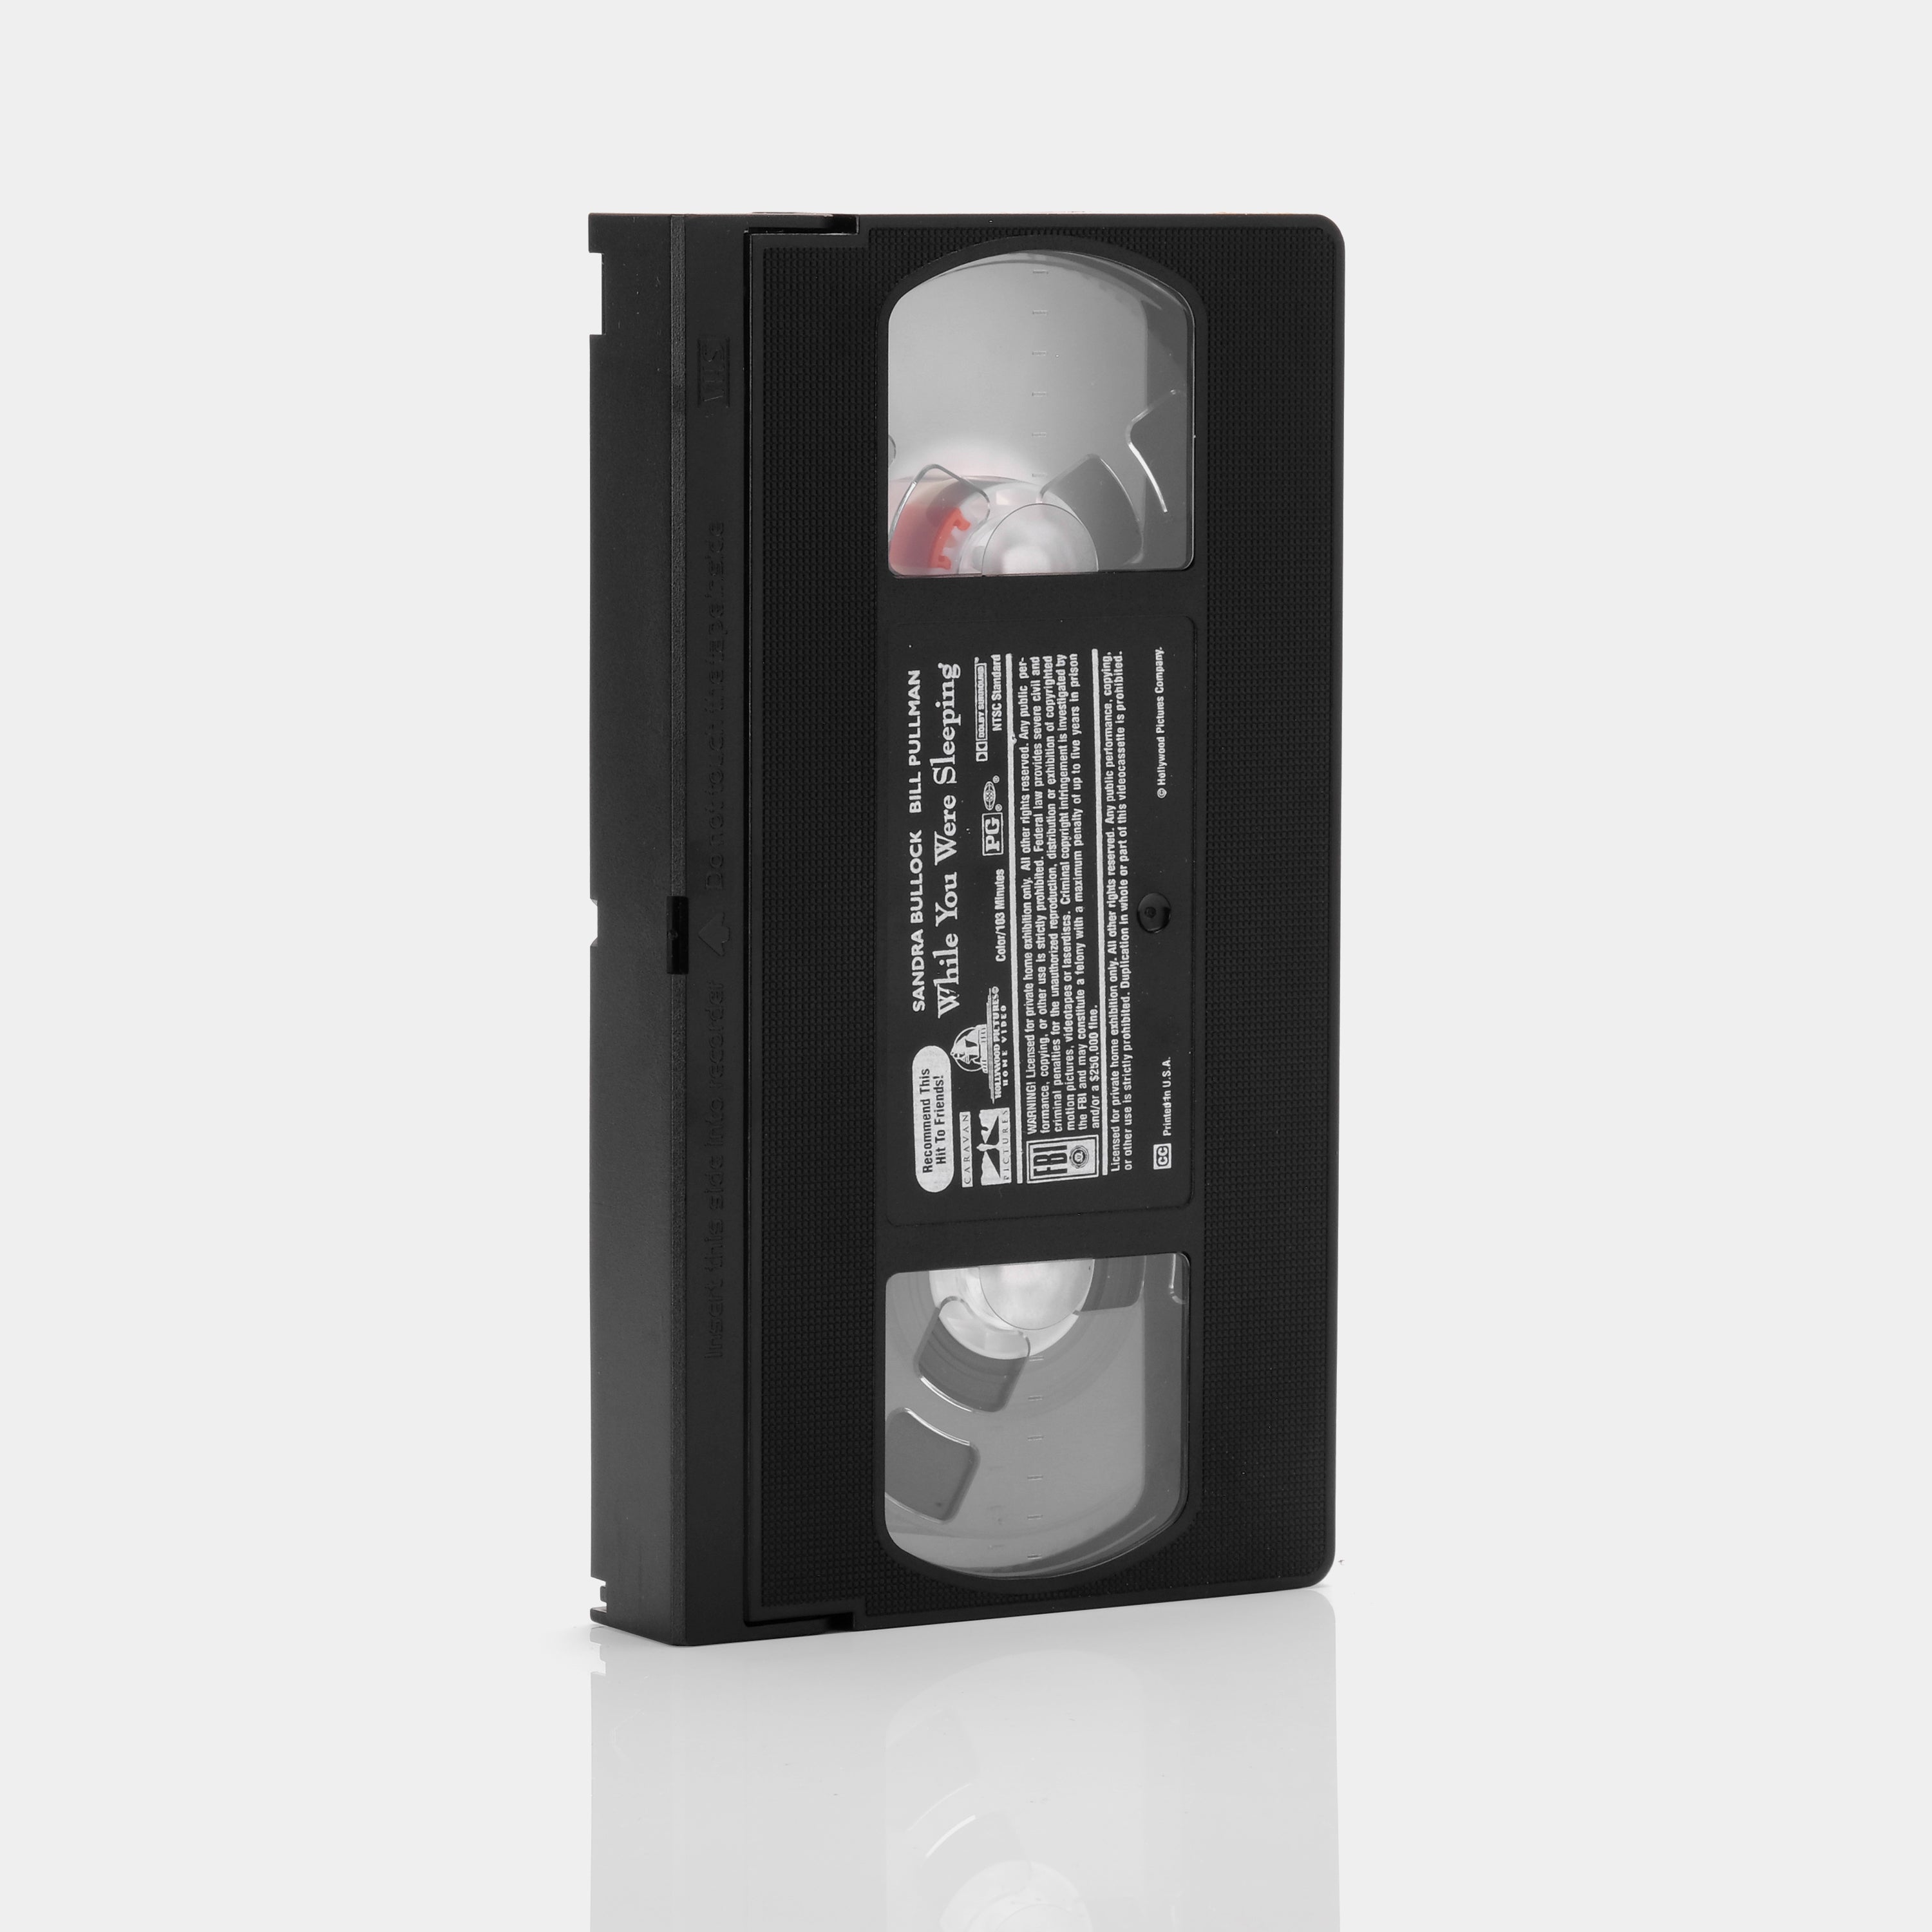 While You Where Sleeping VHS Tape